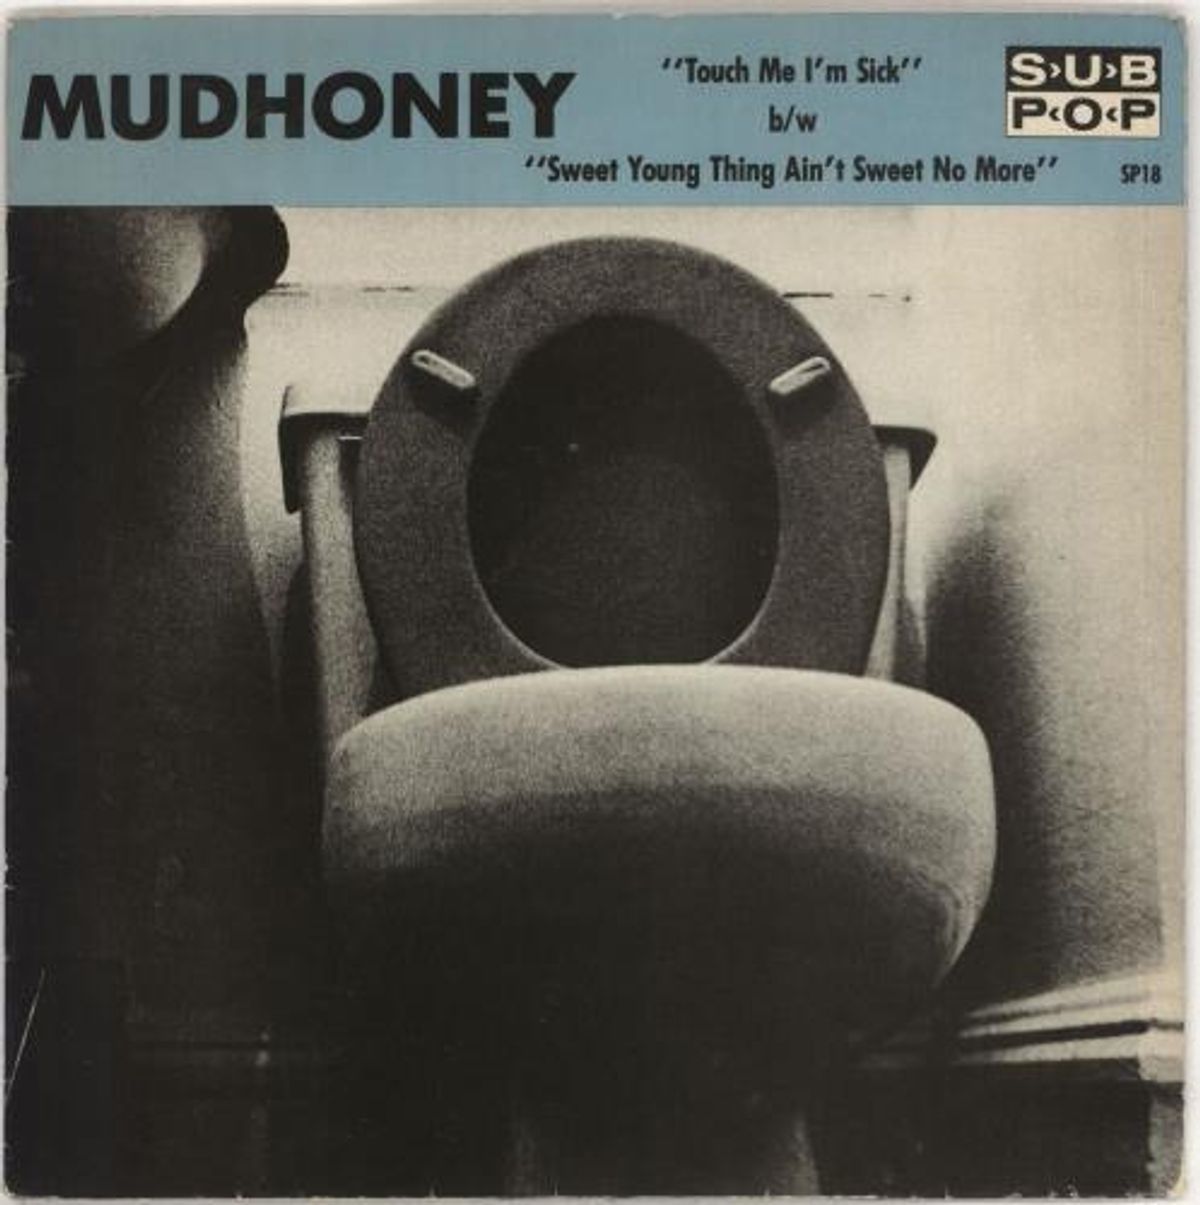 #Pandemiserie - Mudhoney - Touch Me I’m Sick (1988)